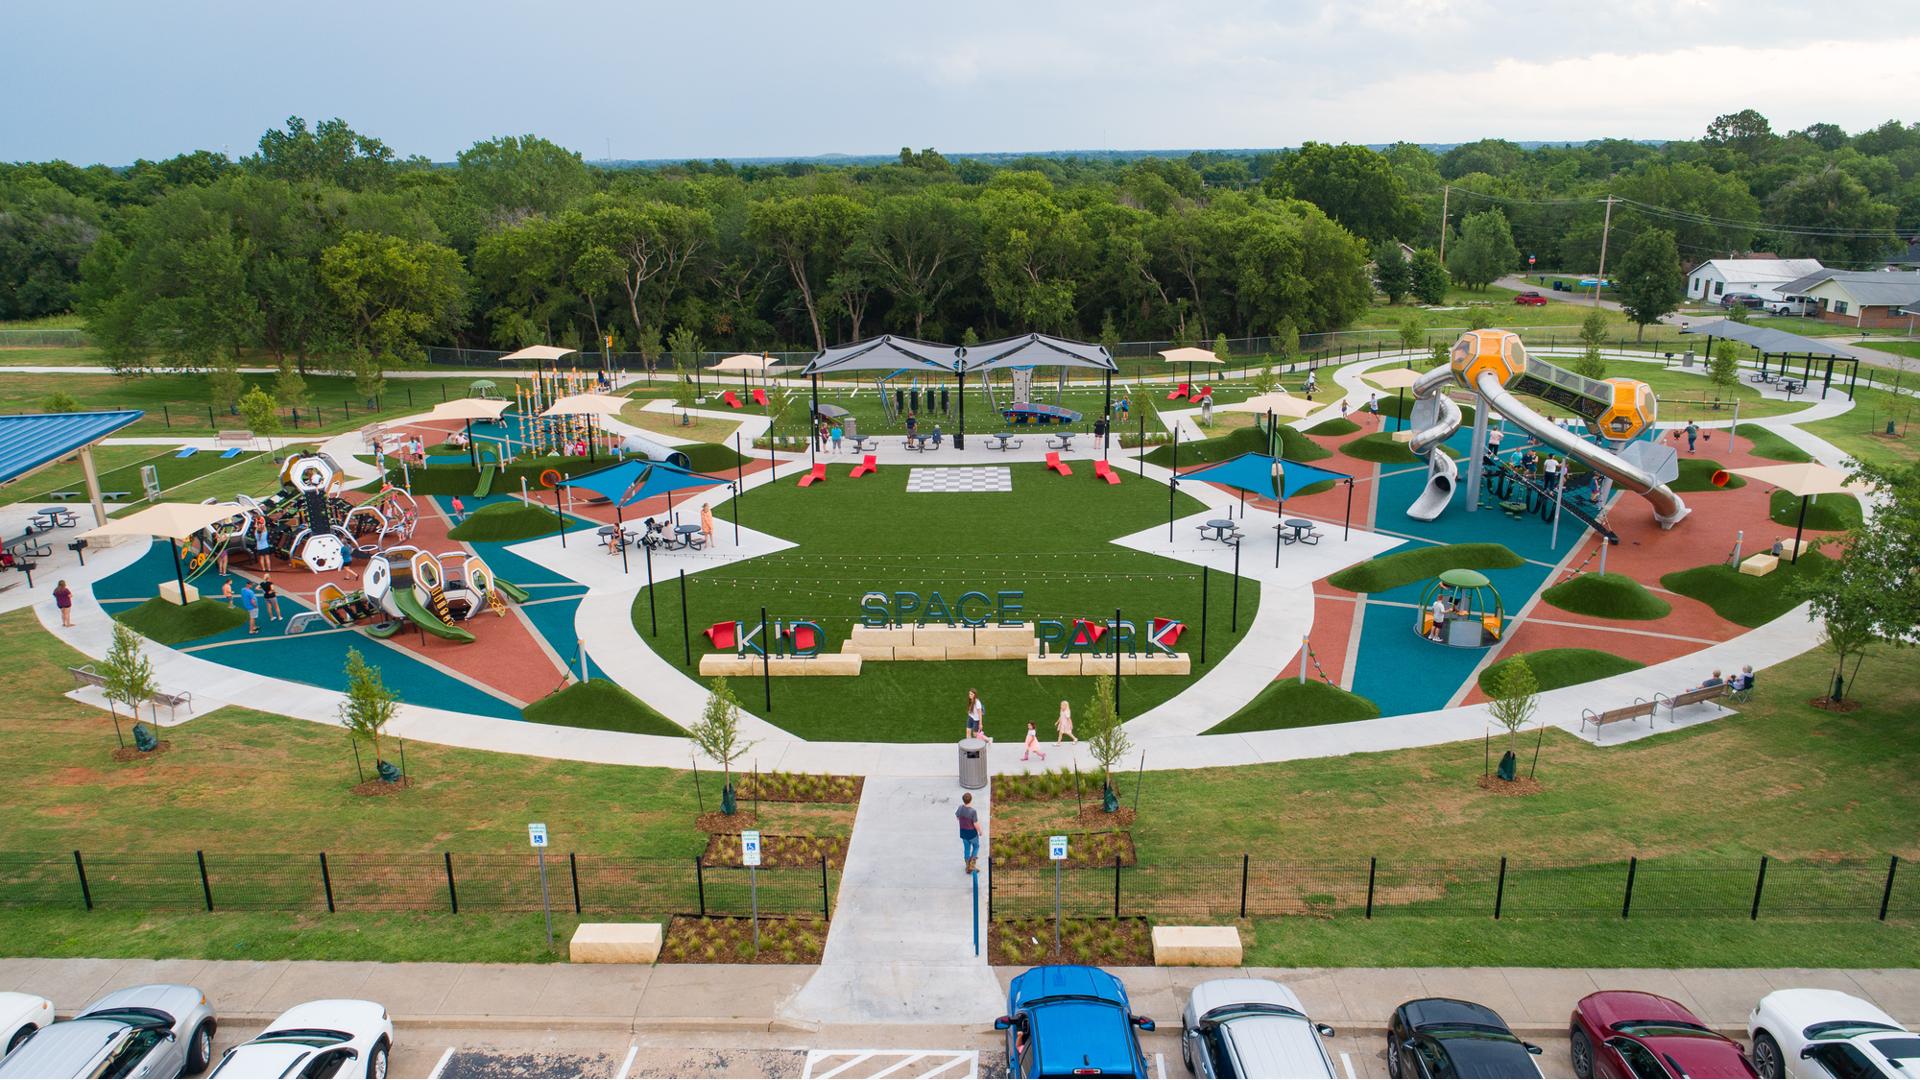 Full elevated view of a large park playground with a central artificial grass lounging area surrounded by play areas on either side with hexagonal shaped towers with slides and other hexagonal designed play structures.